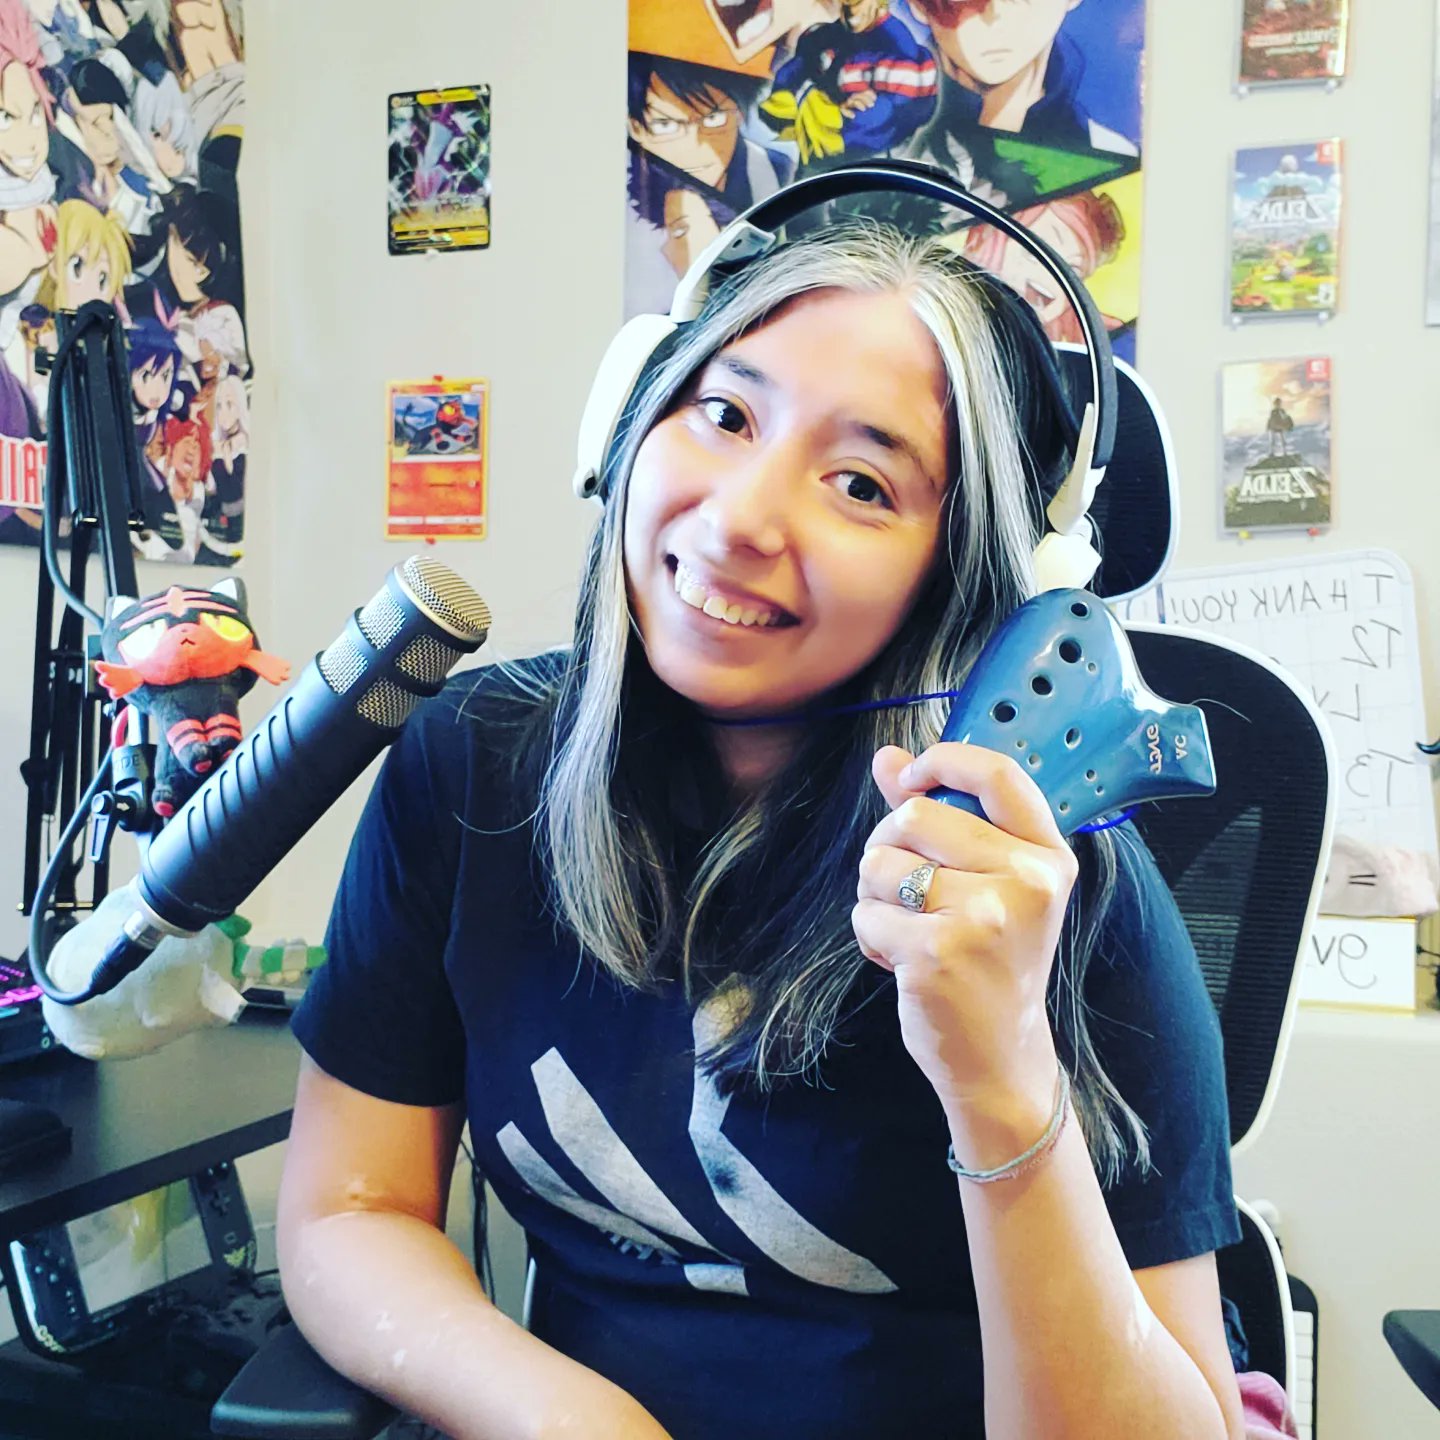 Self portrait of a young woman wearing headphones, holding up an ocarina controller, and leaning into a microphone.